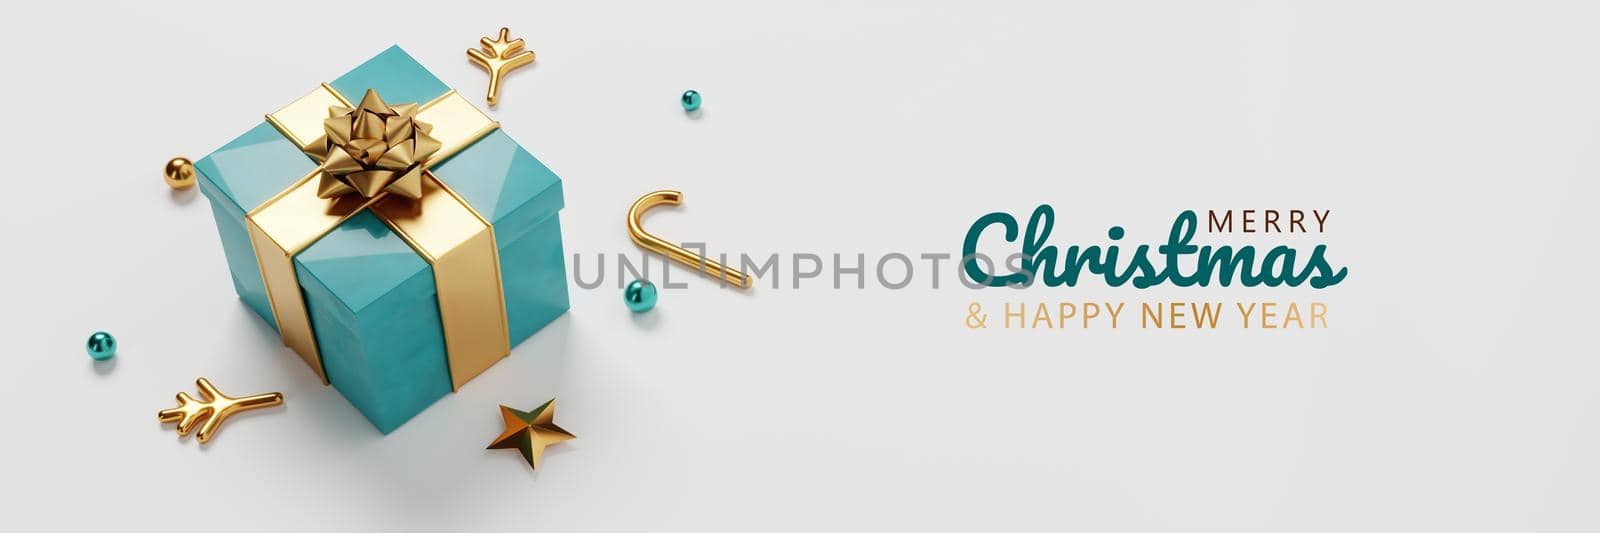 Merry Christmas and Happy New Year decoration props and ornament on white background. Holiday festival and winter concept. 3D illustration rendering. by MiniStocker